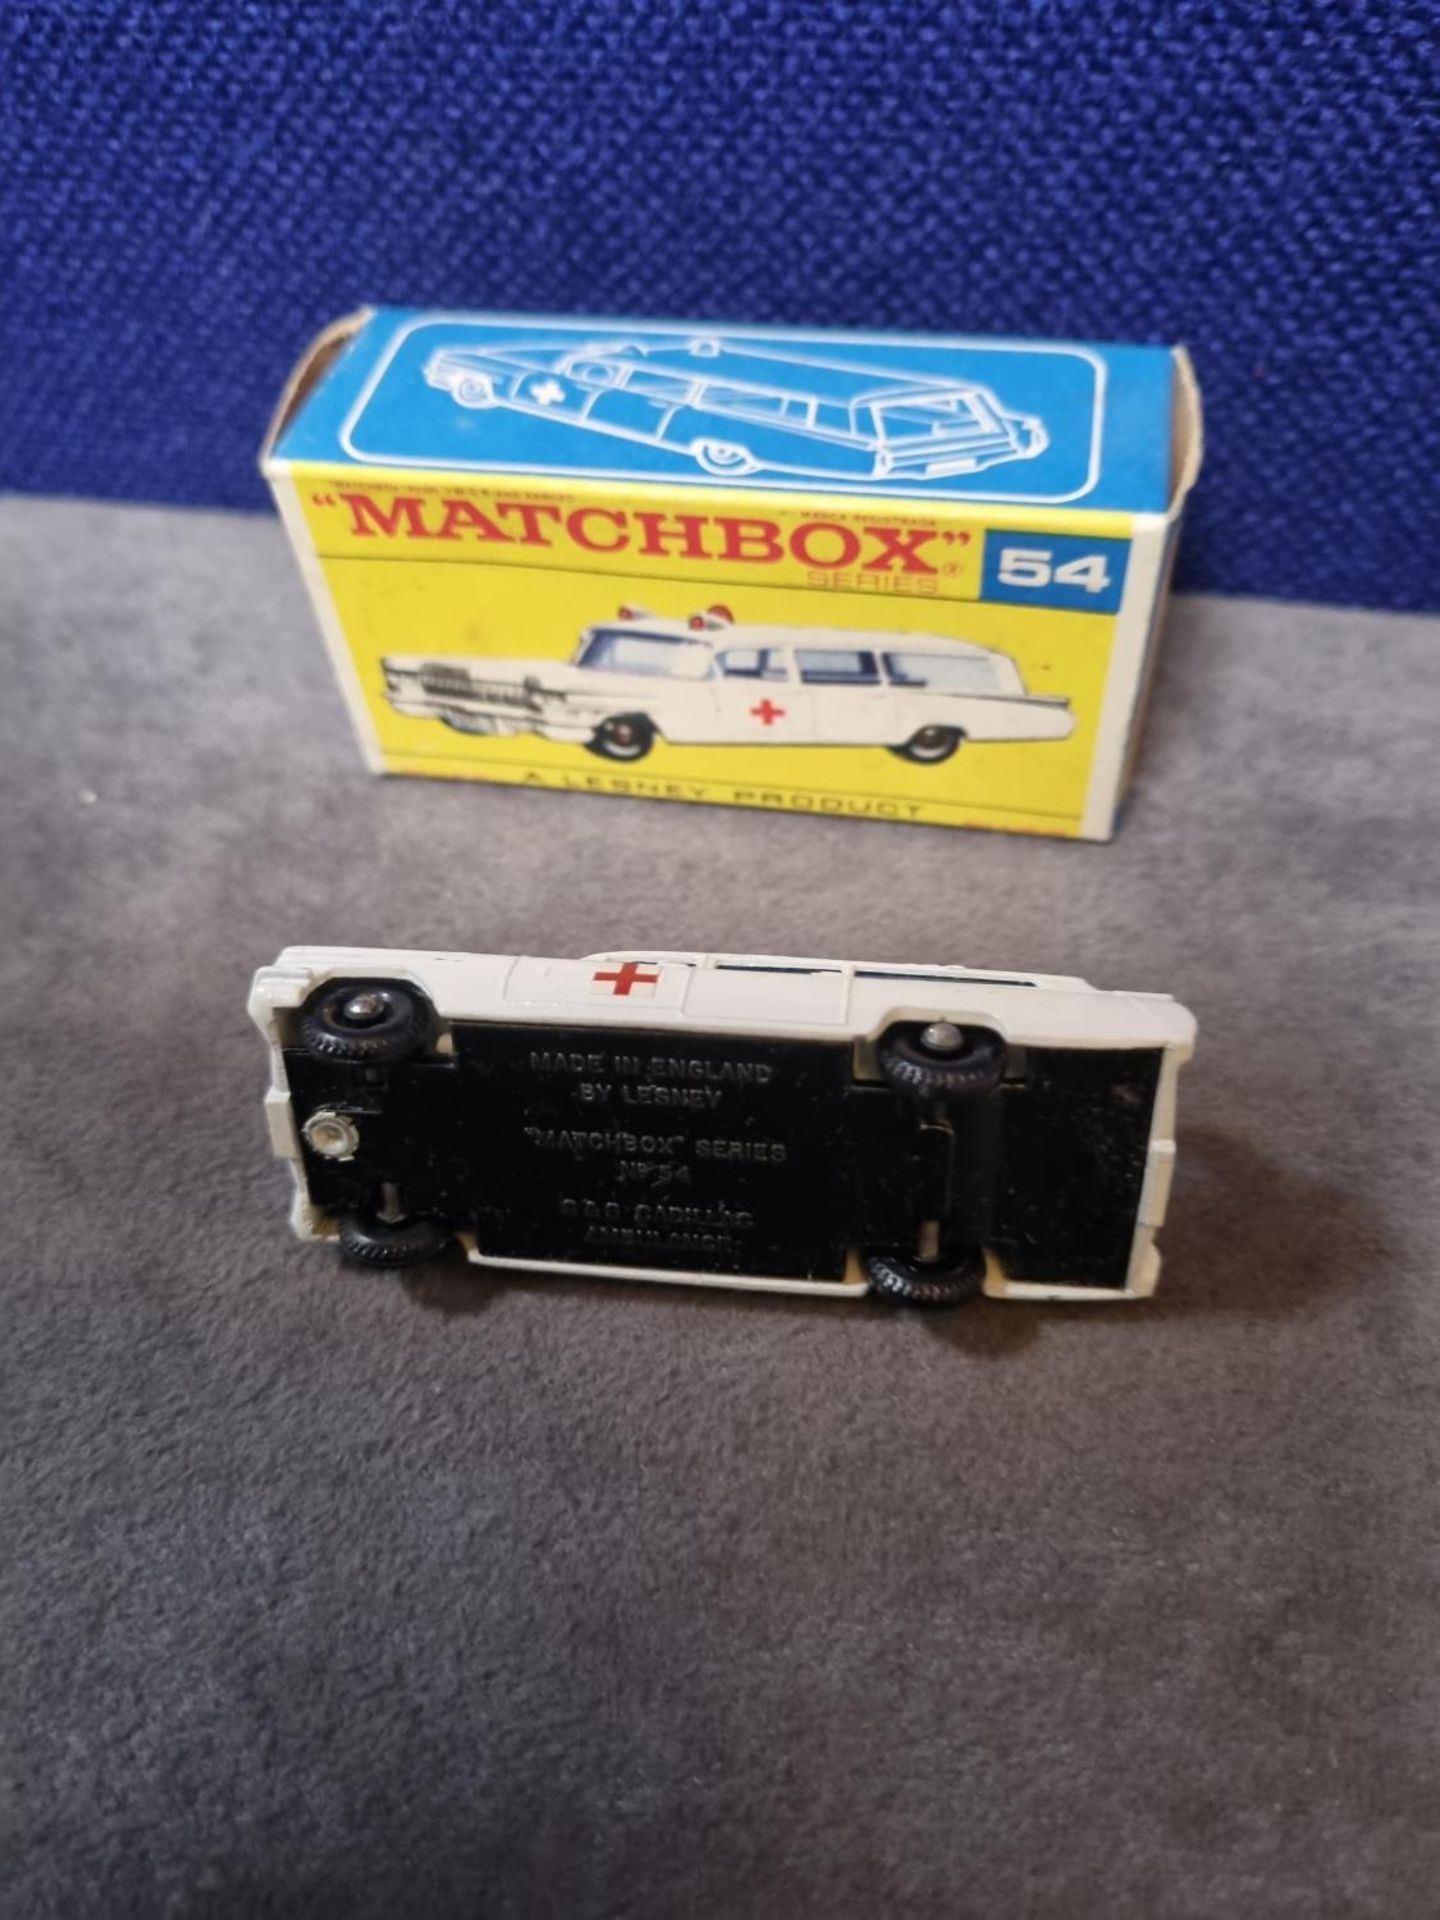 Matchbox Lesney Diecast #54b Cadillac Ambulance 1965-69 Mint Model In Firm F Type Box - Image 5 of 5